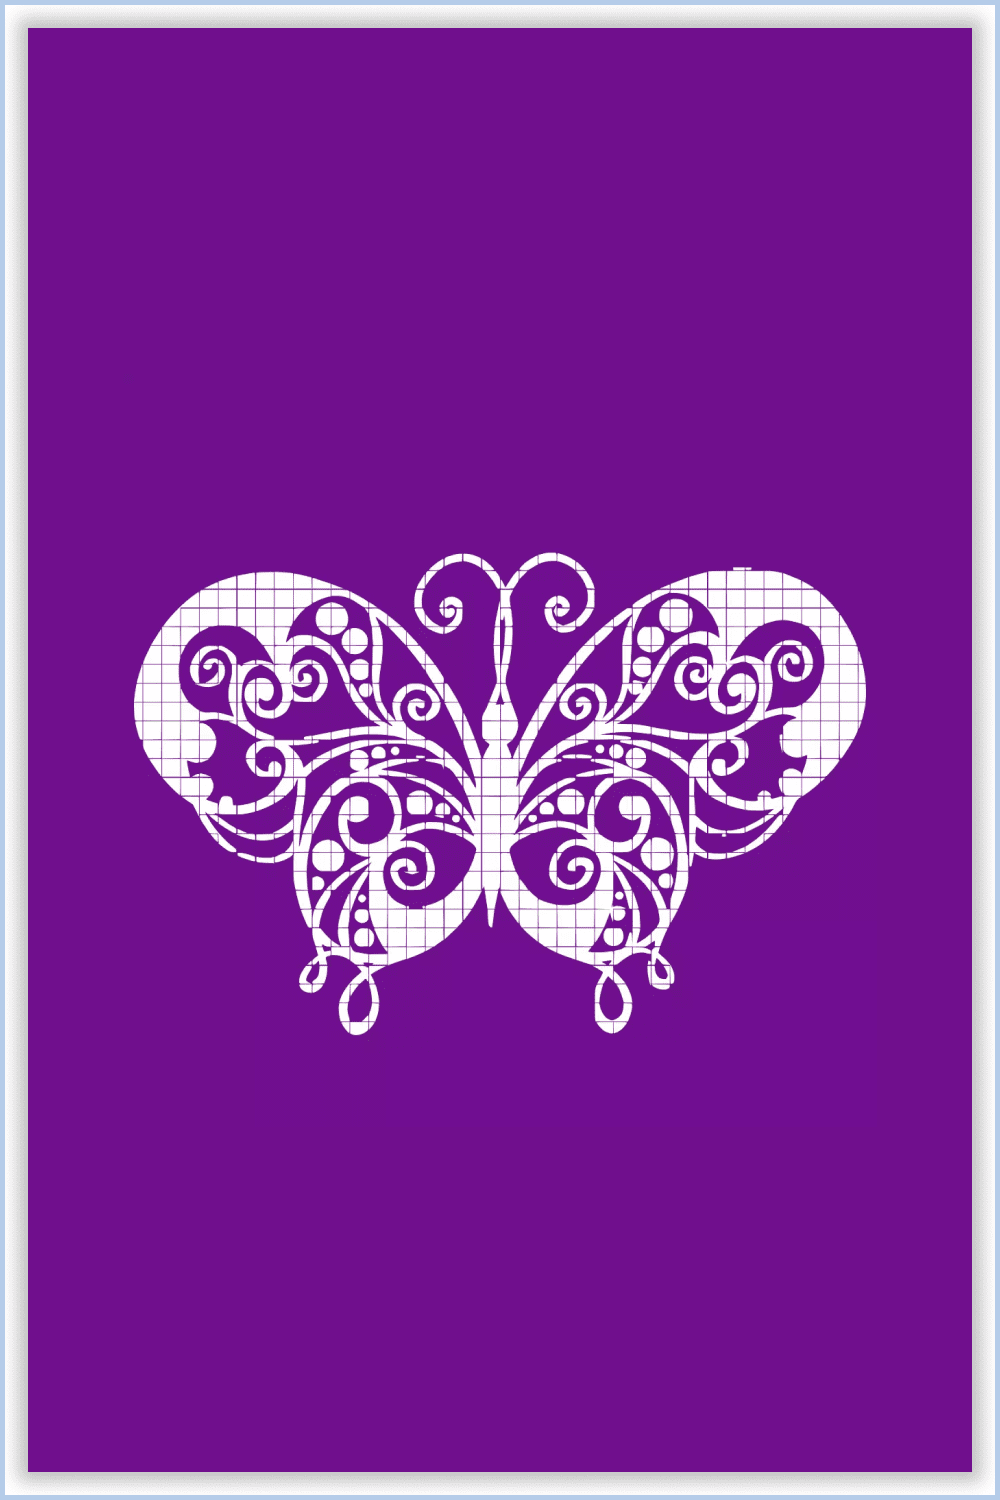 Butterfly in the form of an ornament on a purple background.